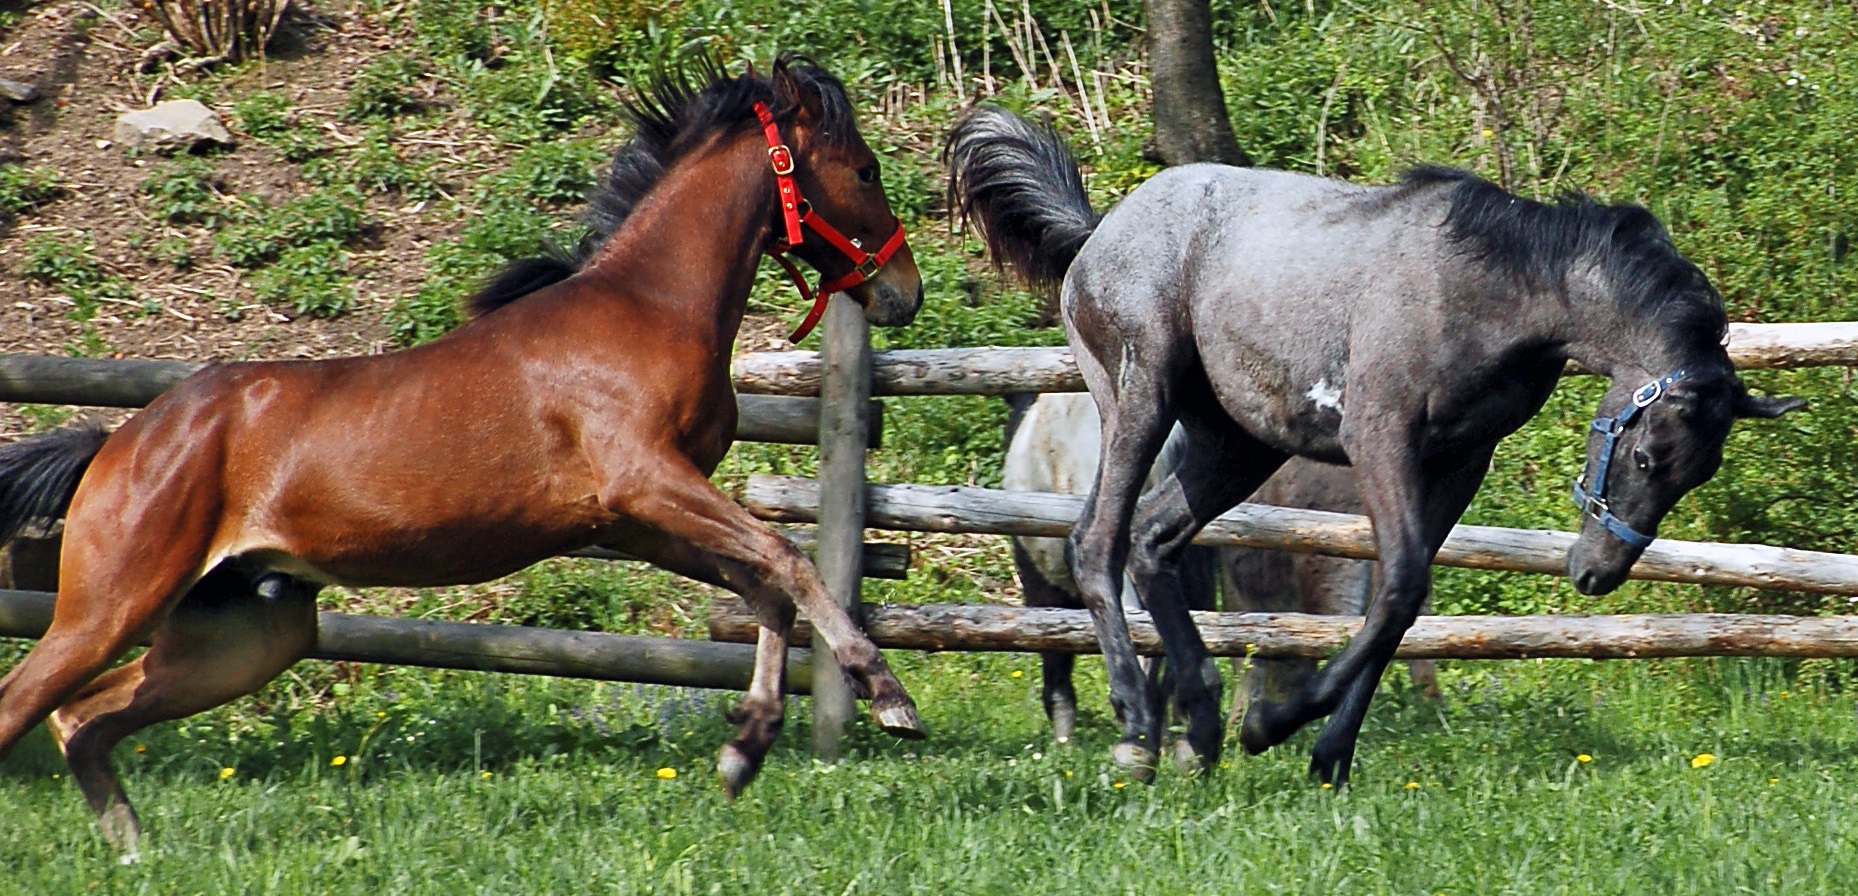 Horse Behaviour and Safety - Two horses in a field